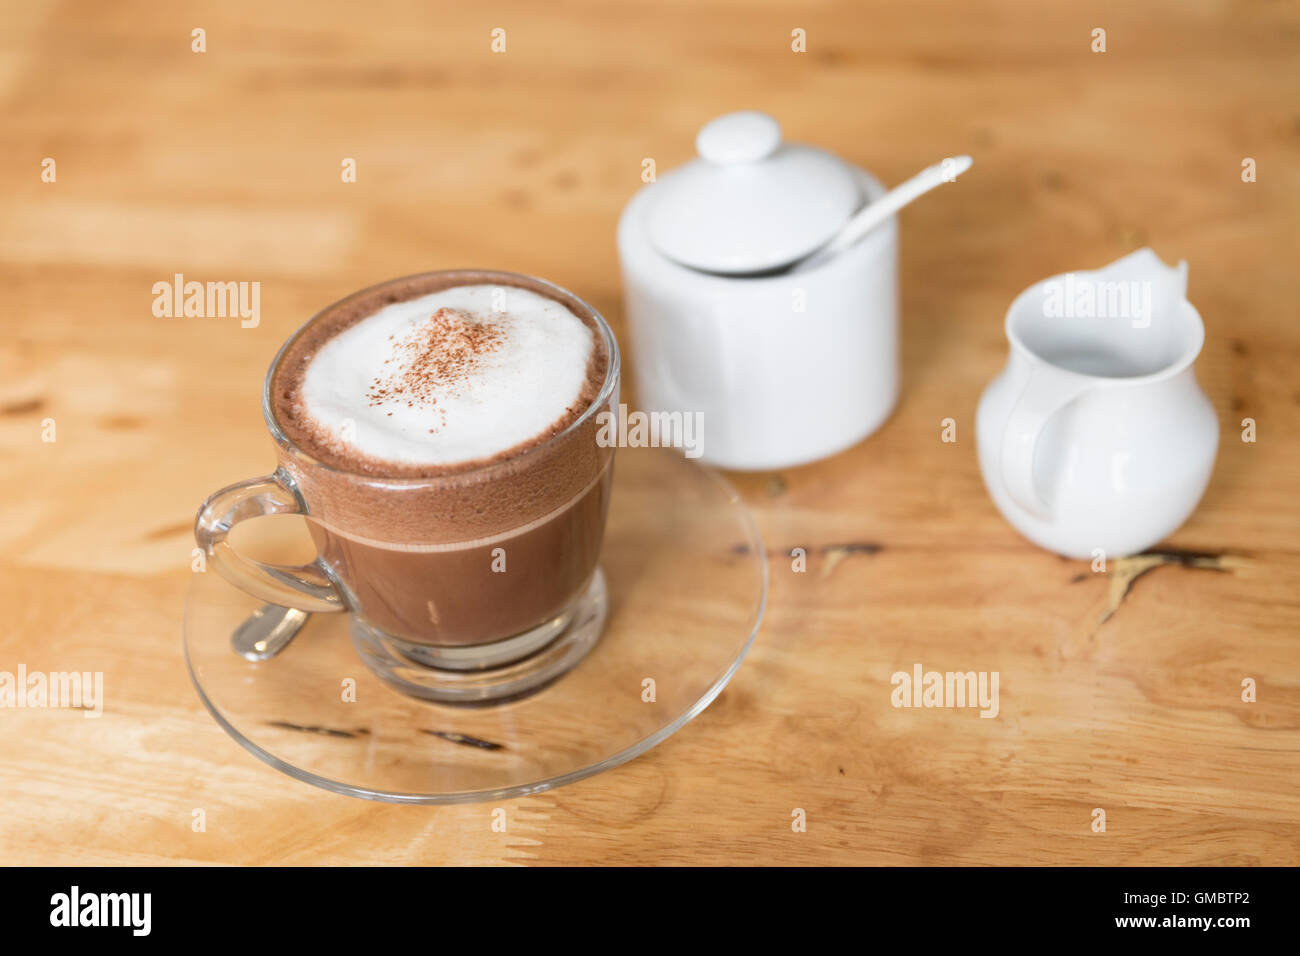 Brown Plastic Cups for Coffee, Cocoa, Hot Chocolate Stock Photo - Image of  drink, macchiato: 147046222